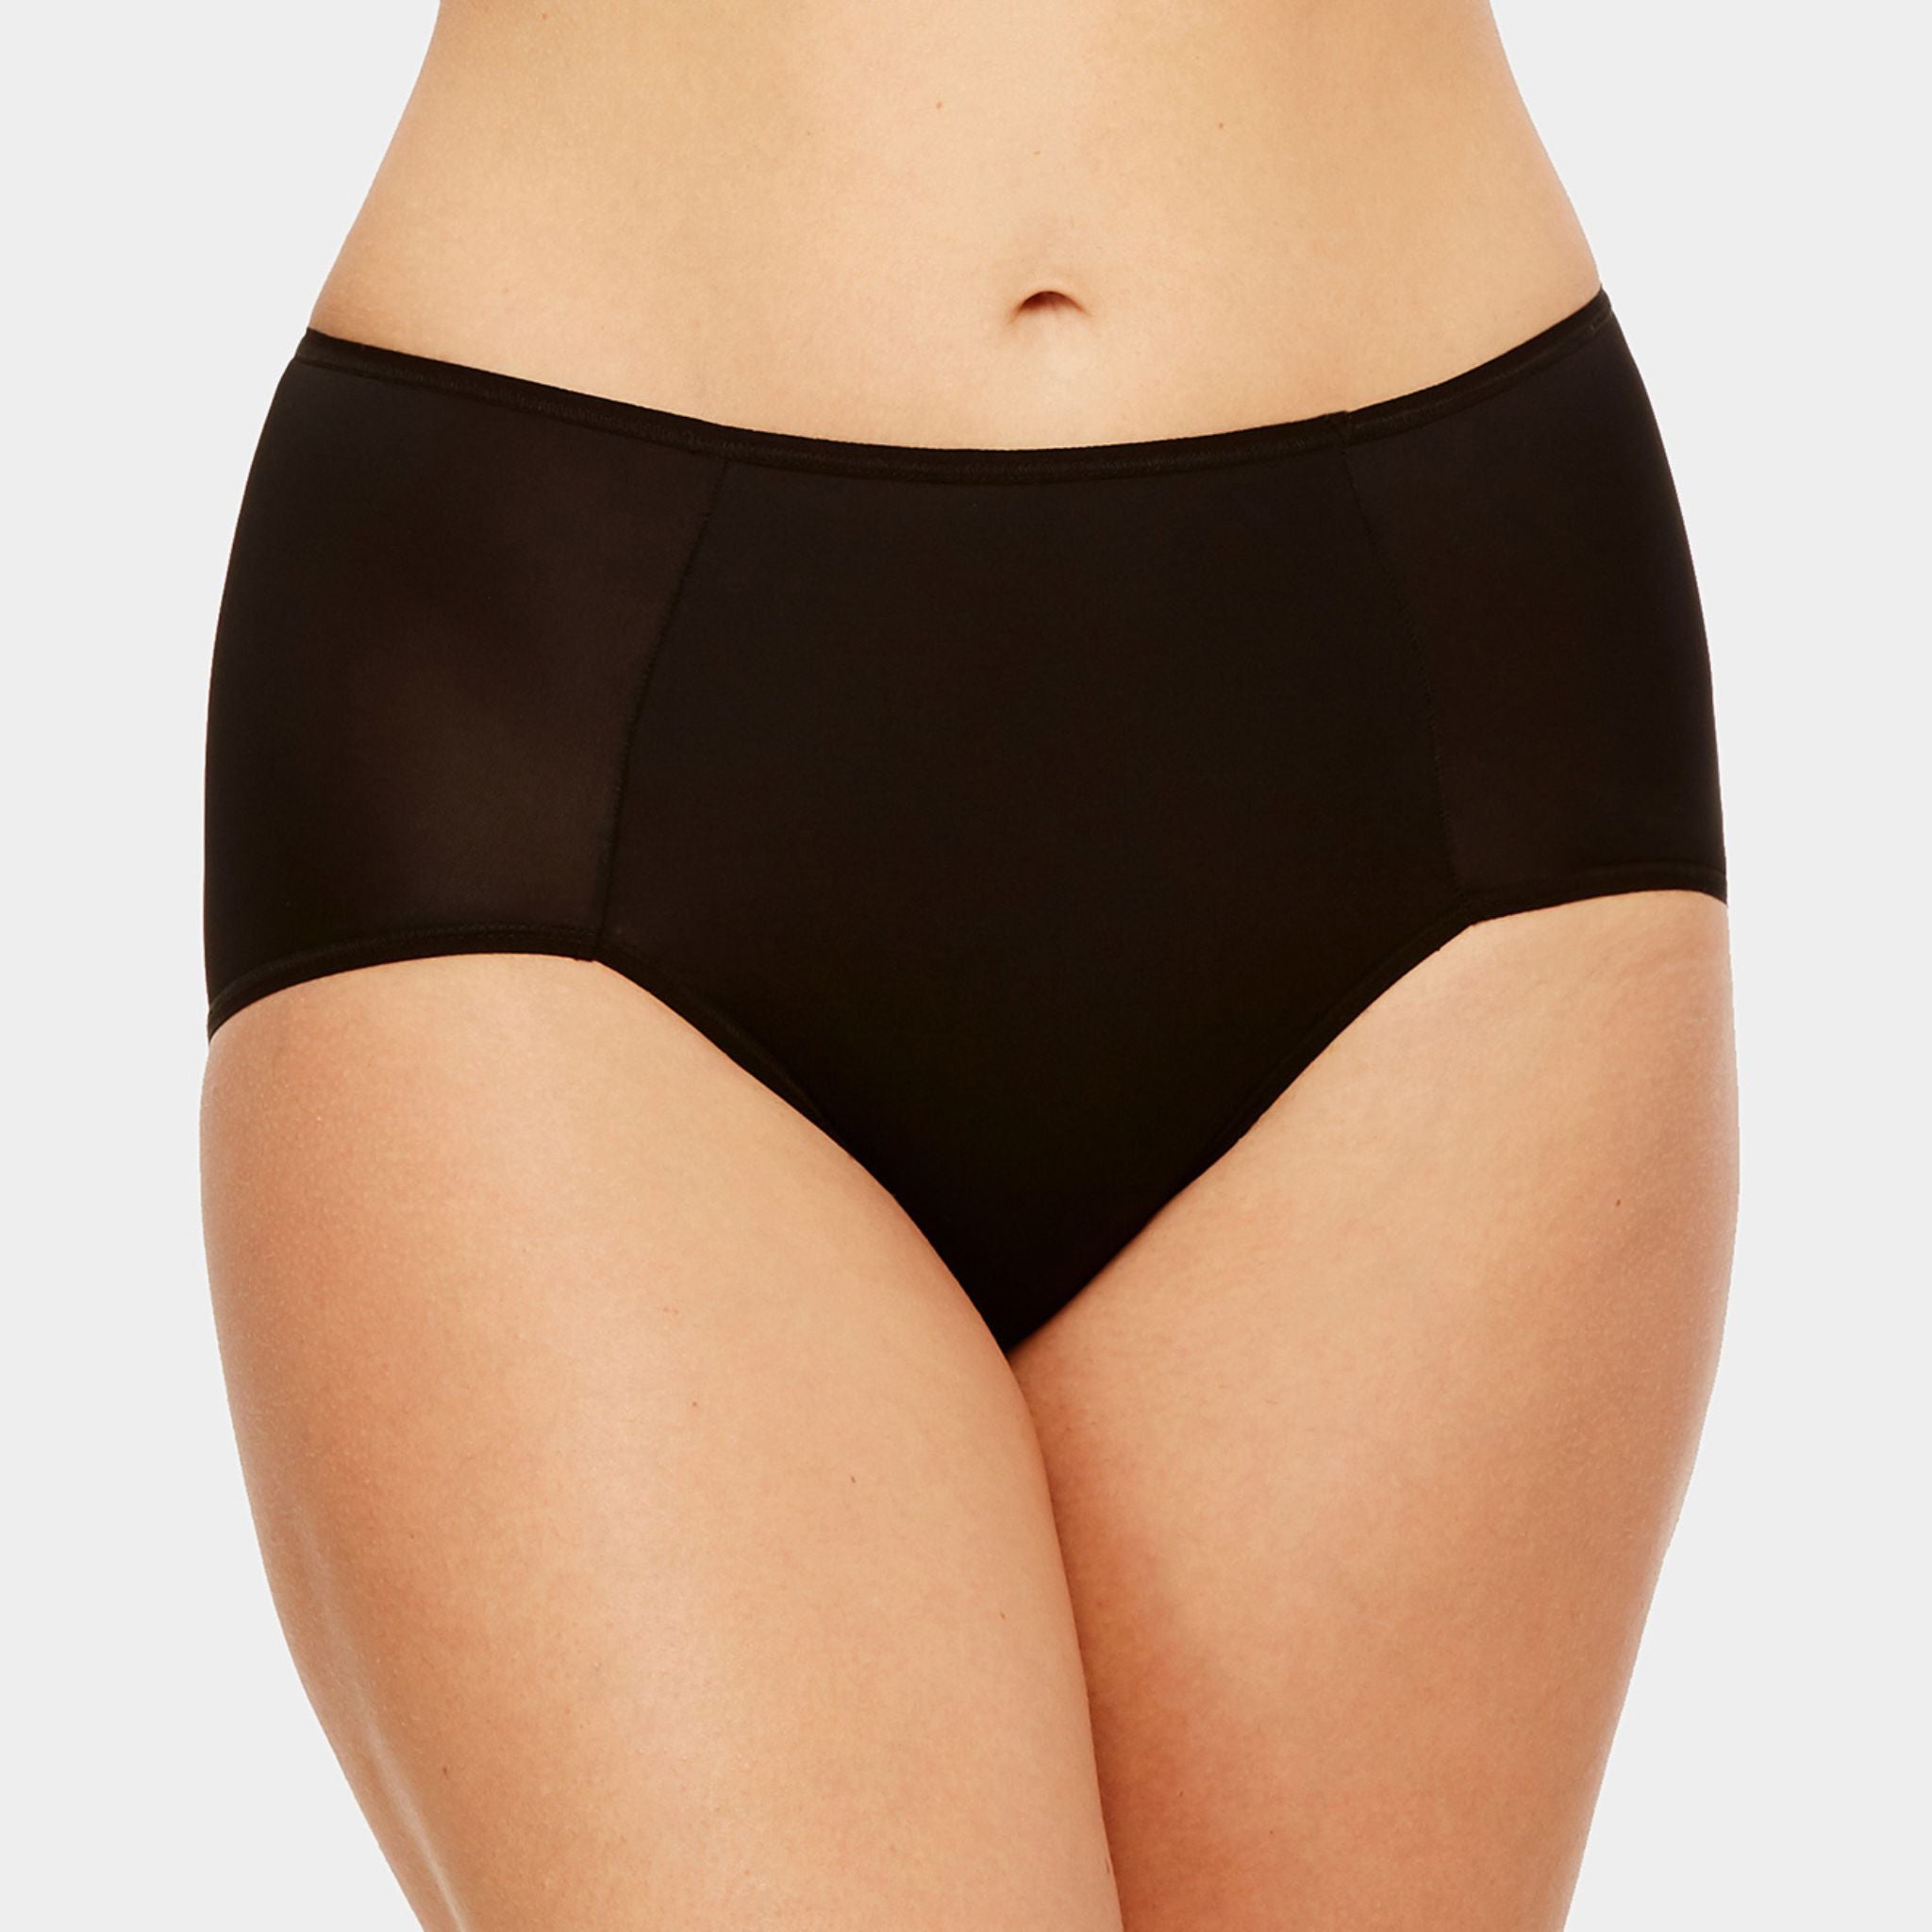 The new retro-inspired high waist design Smoothing Brief features a front panels lined with soft touch power mesh for a light smoothing effect. Ultra-flat elastics and no side seams give a barely-there look under any higher-waisted bottoms, skirts or dresses.